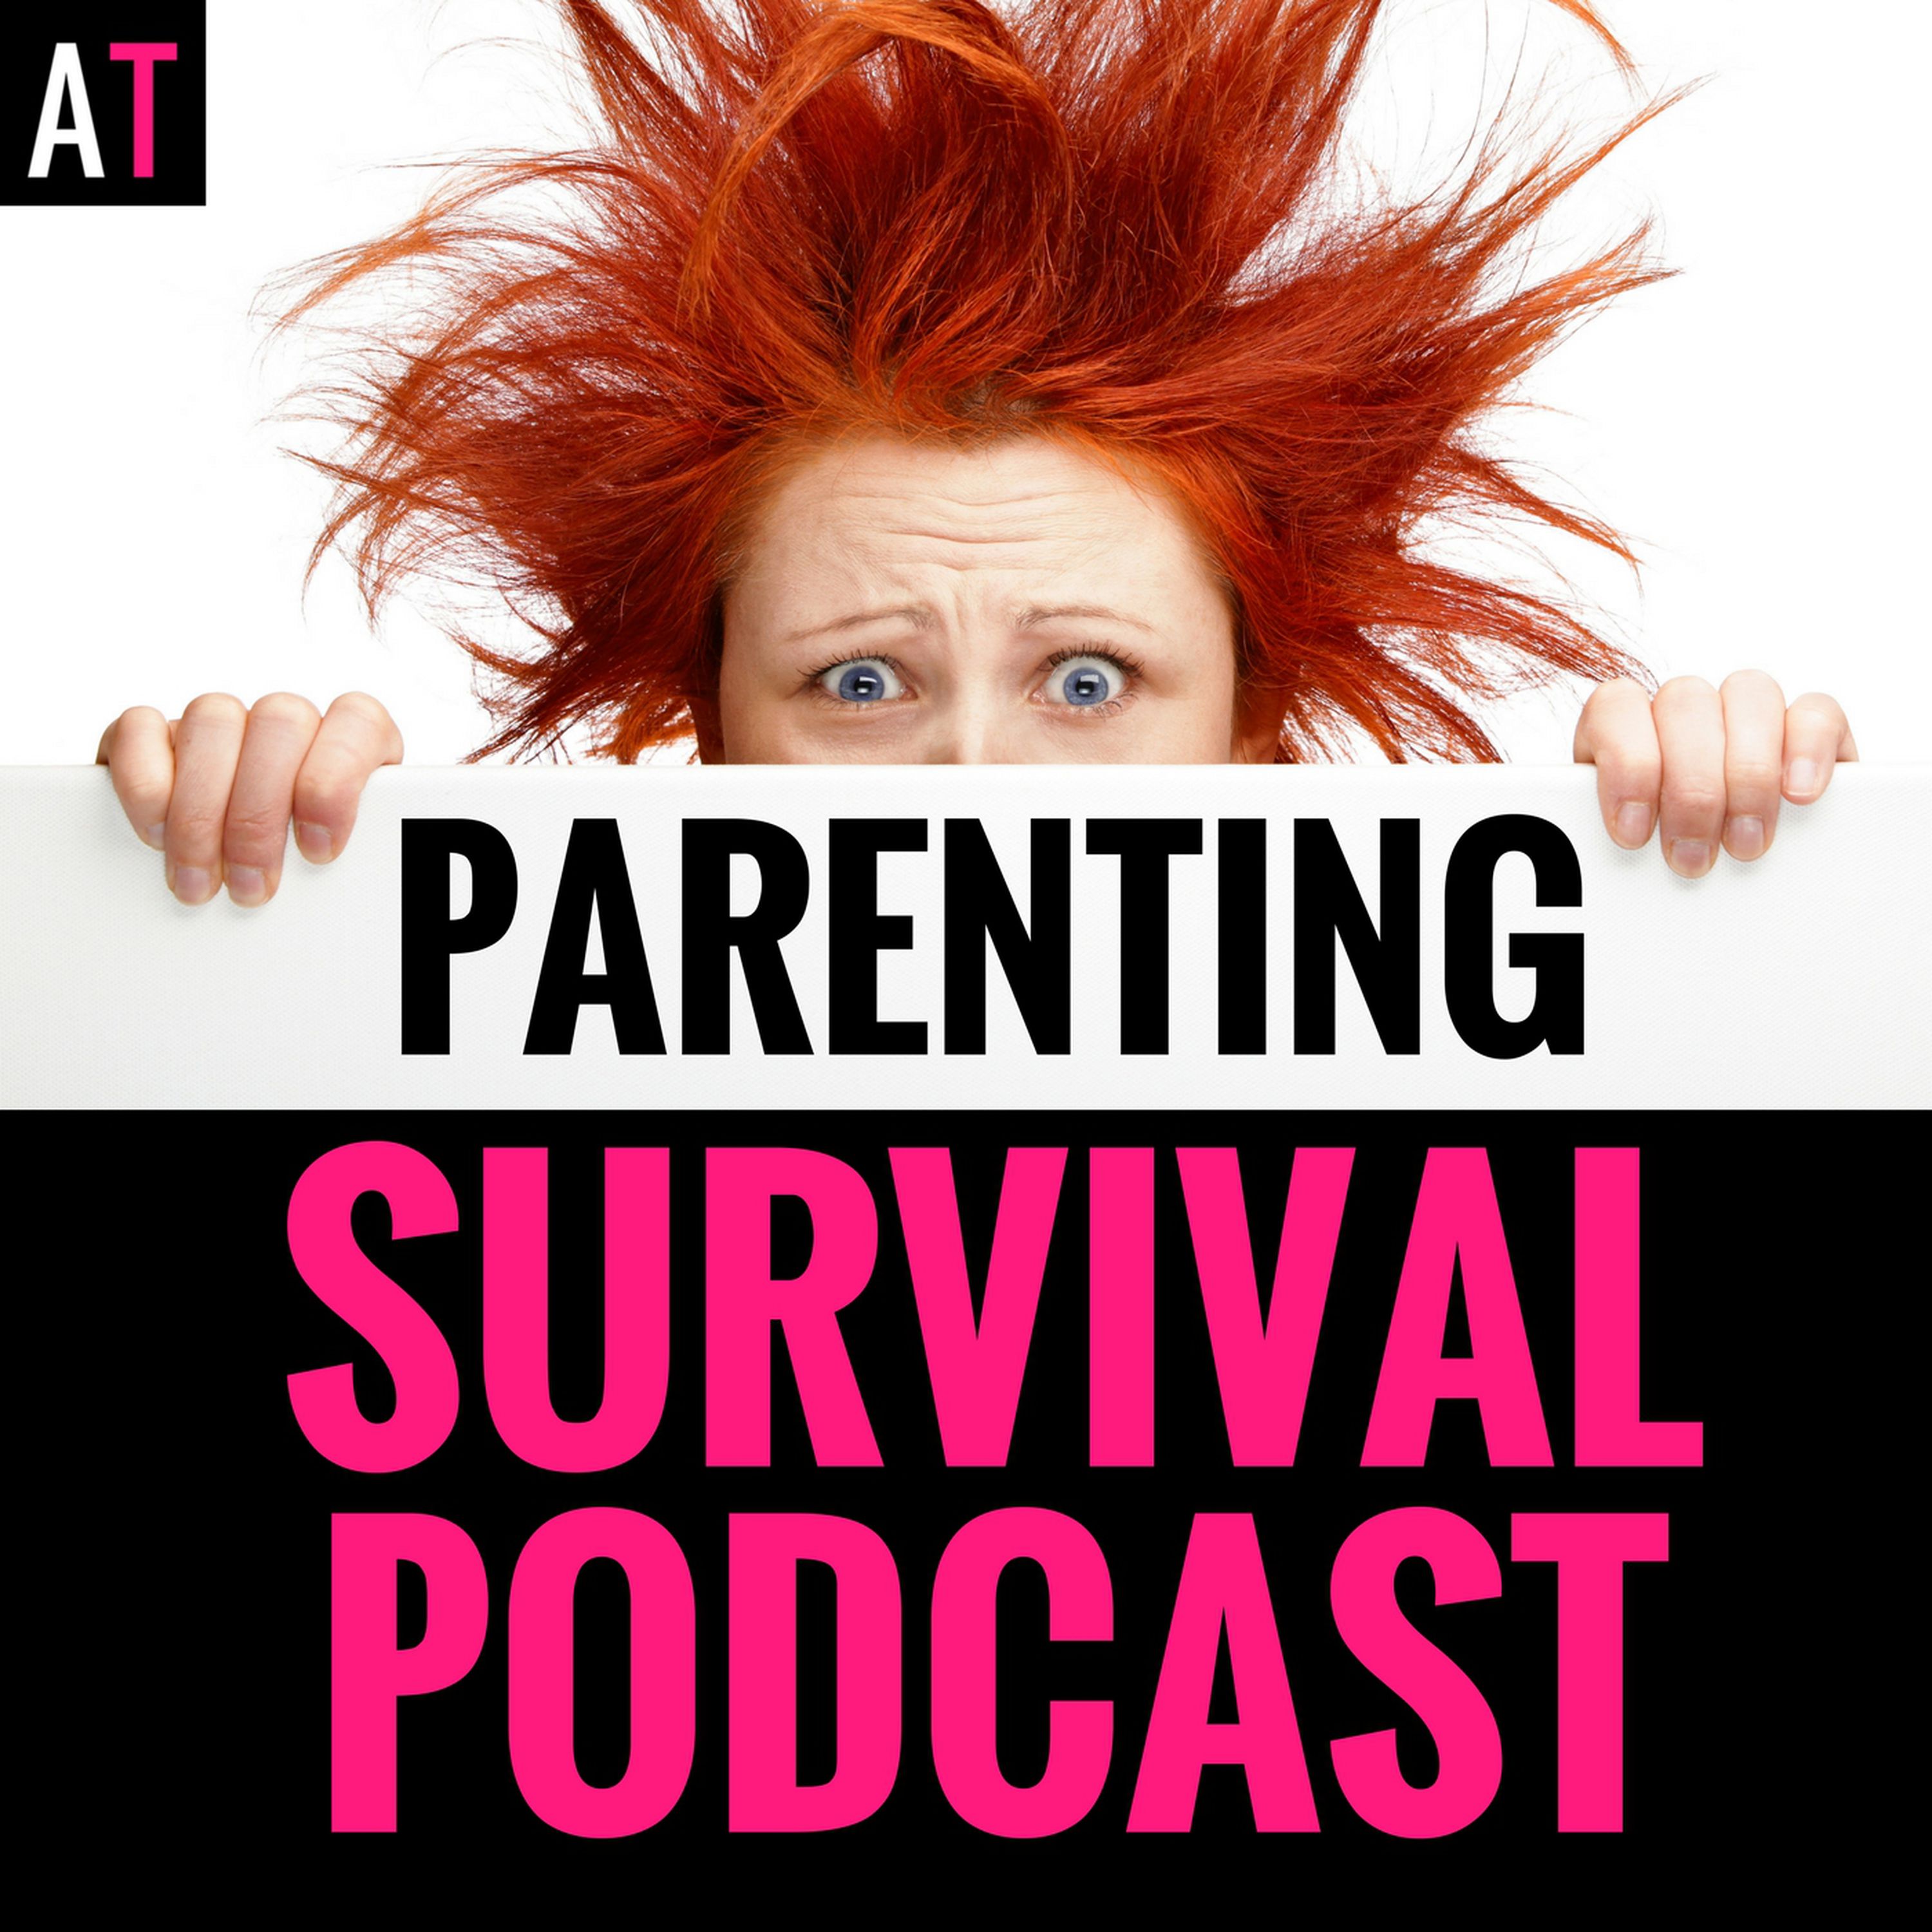 PSP 086: The OCD Symptoms in Kids No One Wants to Talk About